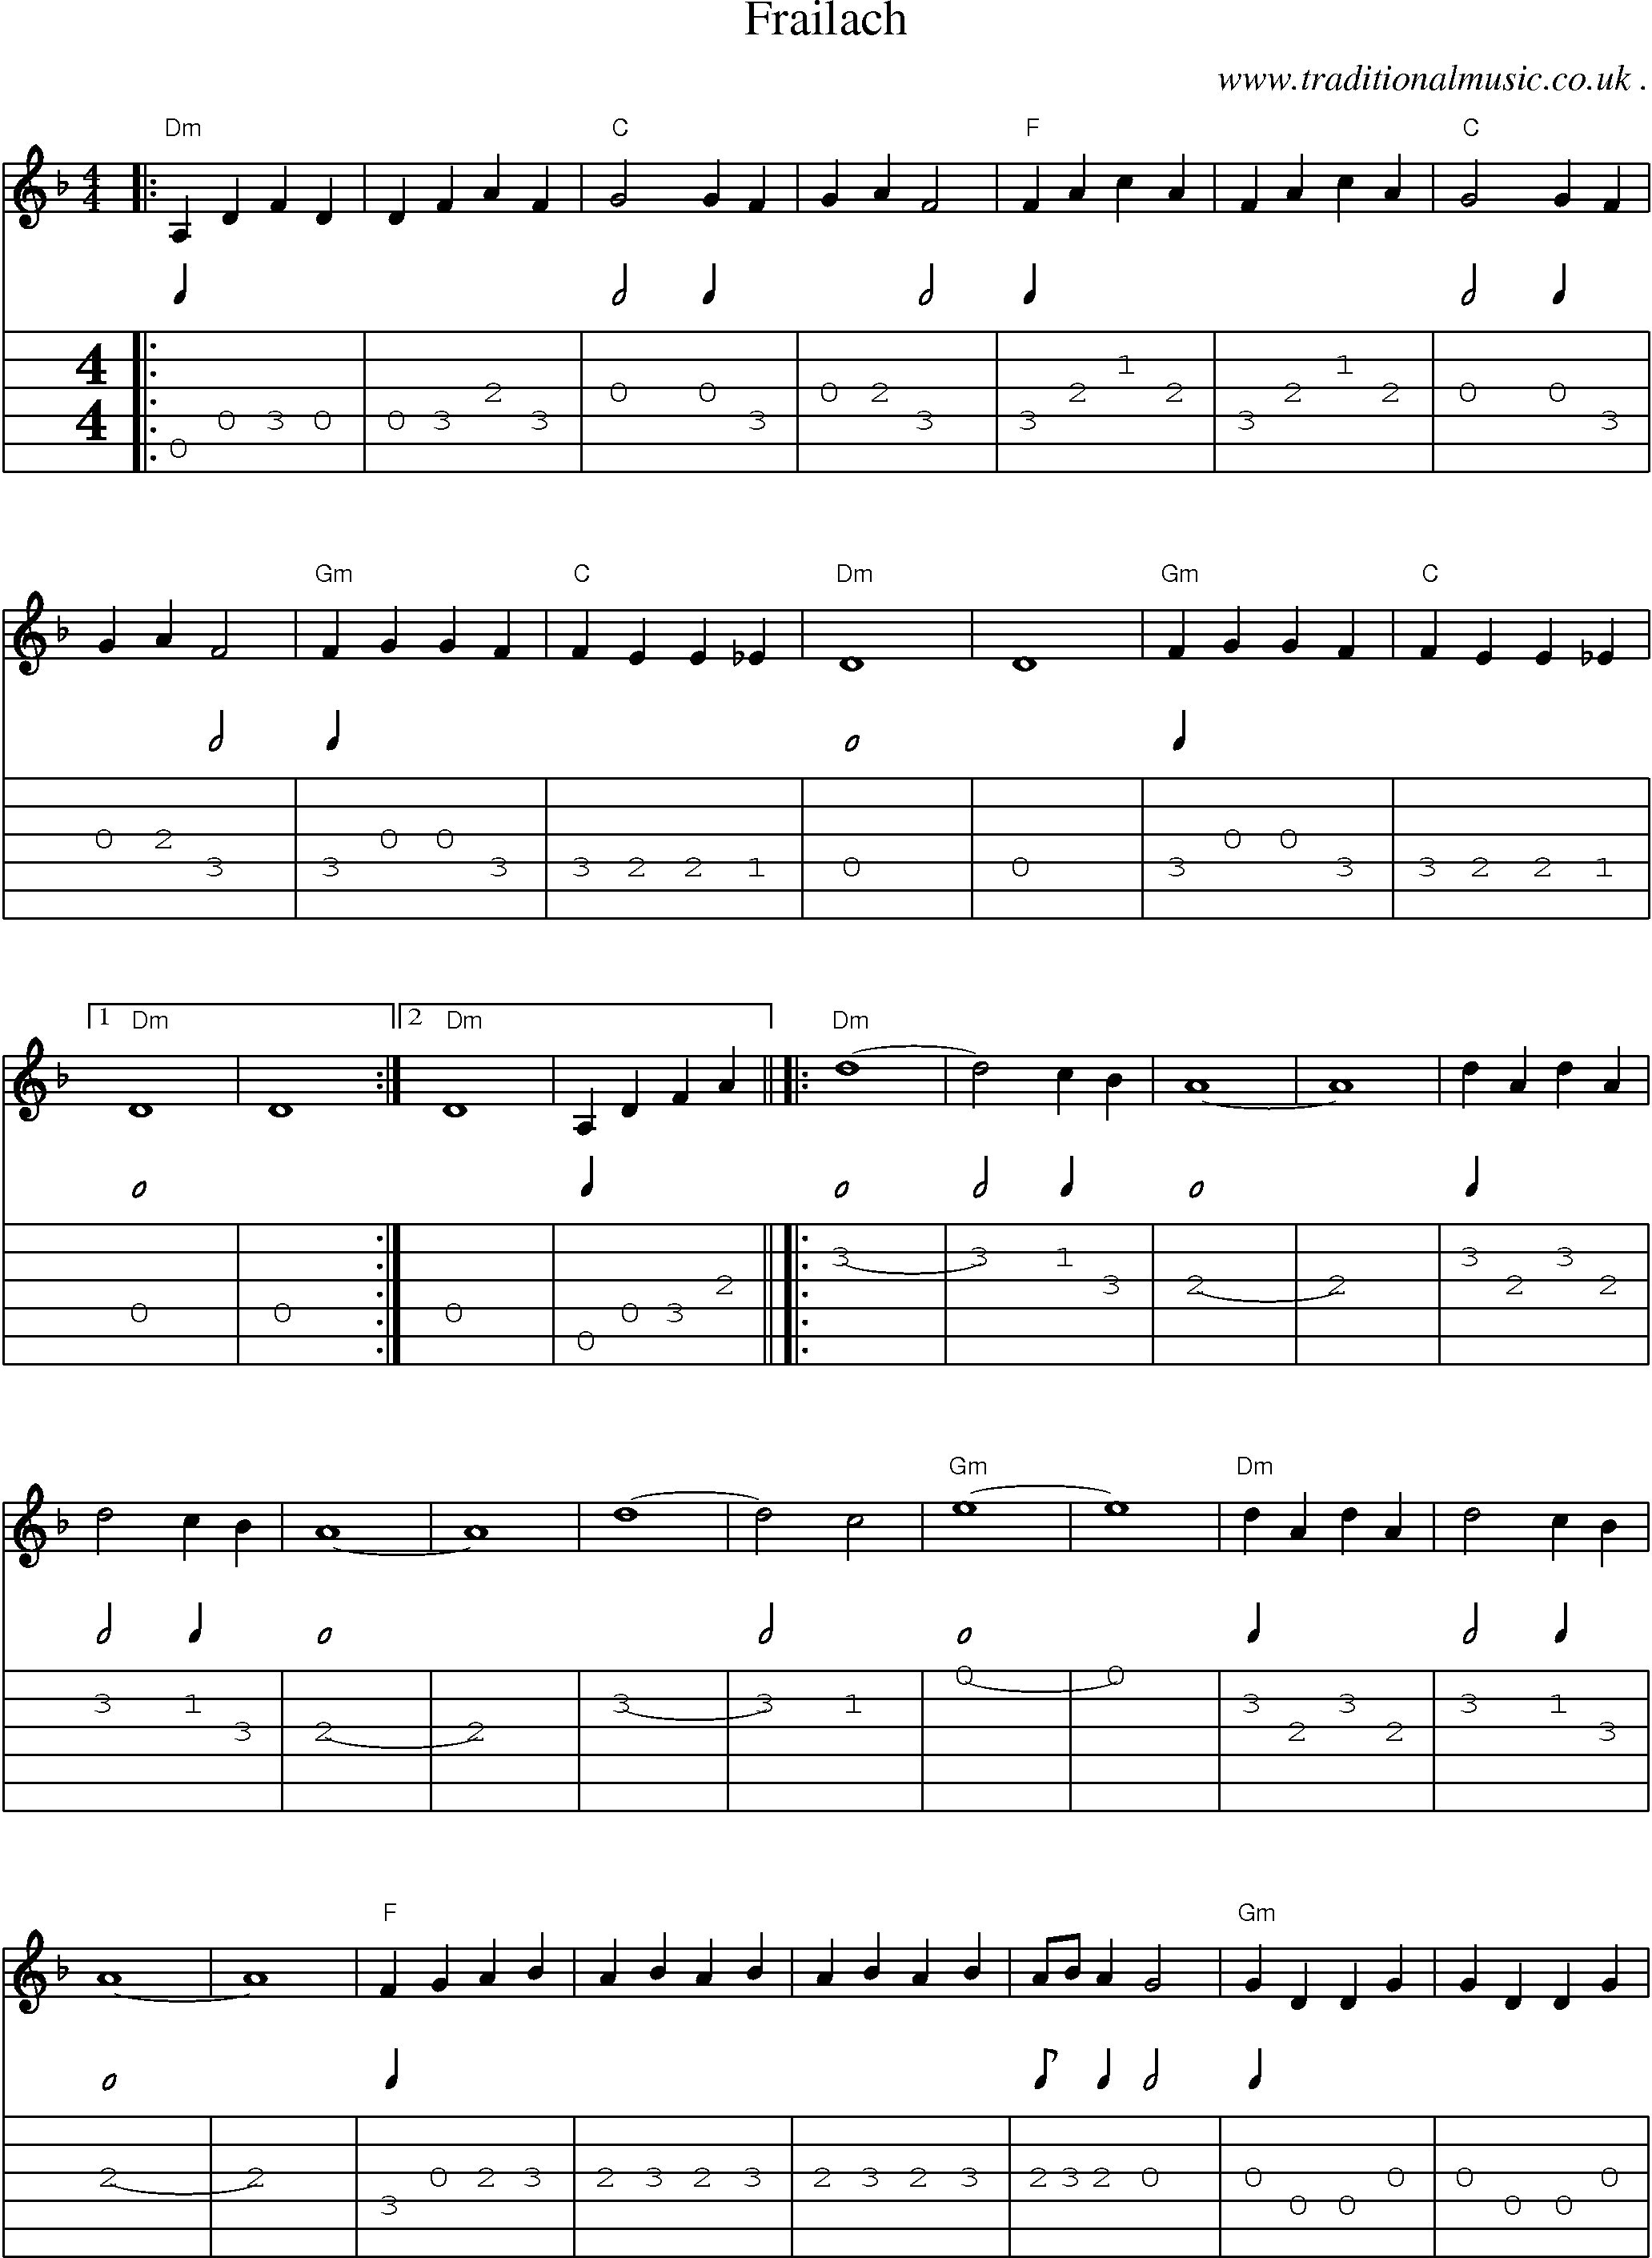 Music Score and Guitar Tabs for Frailach